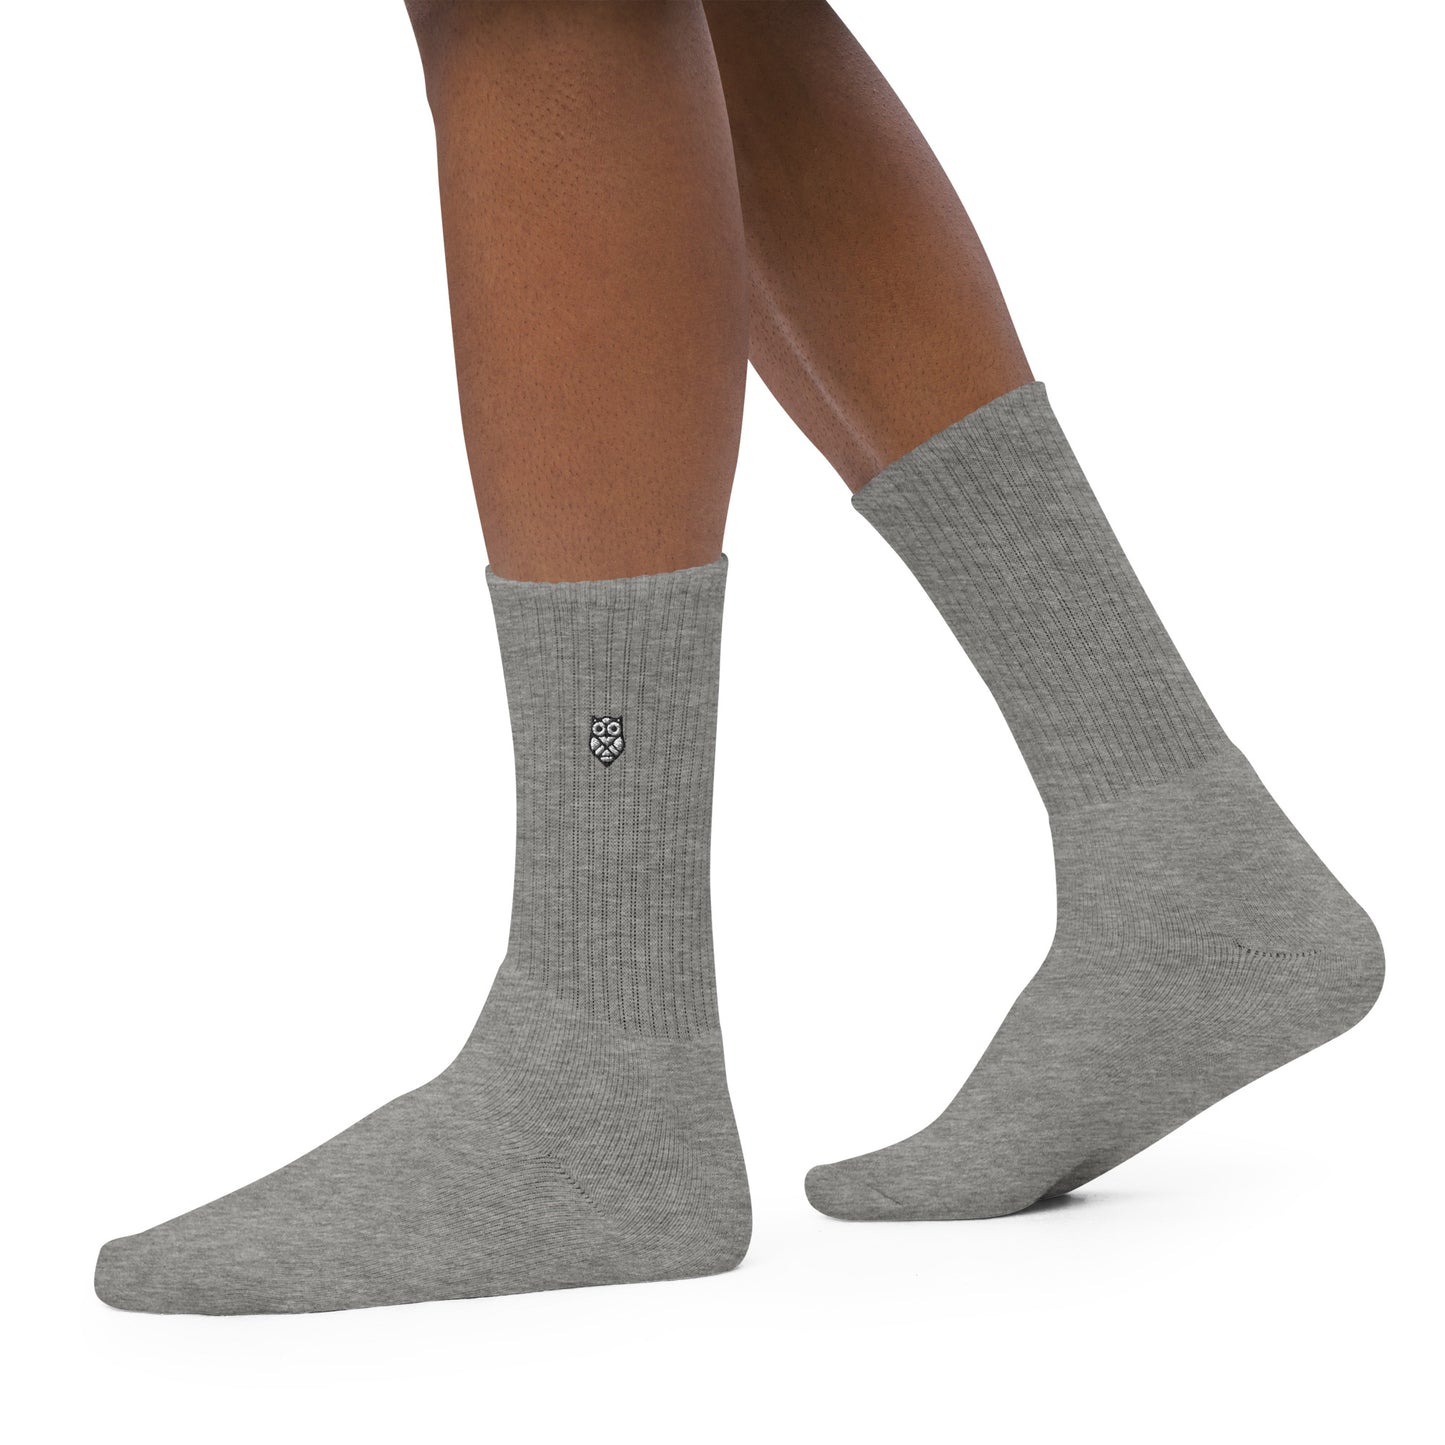  socks-from-the-side-with-owl-symbol